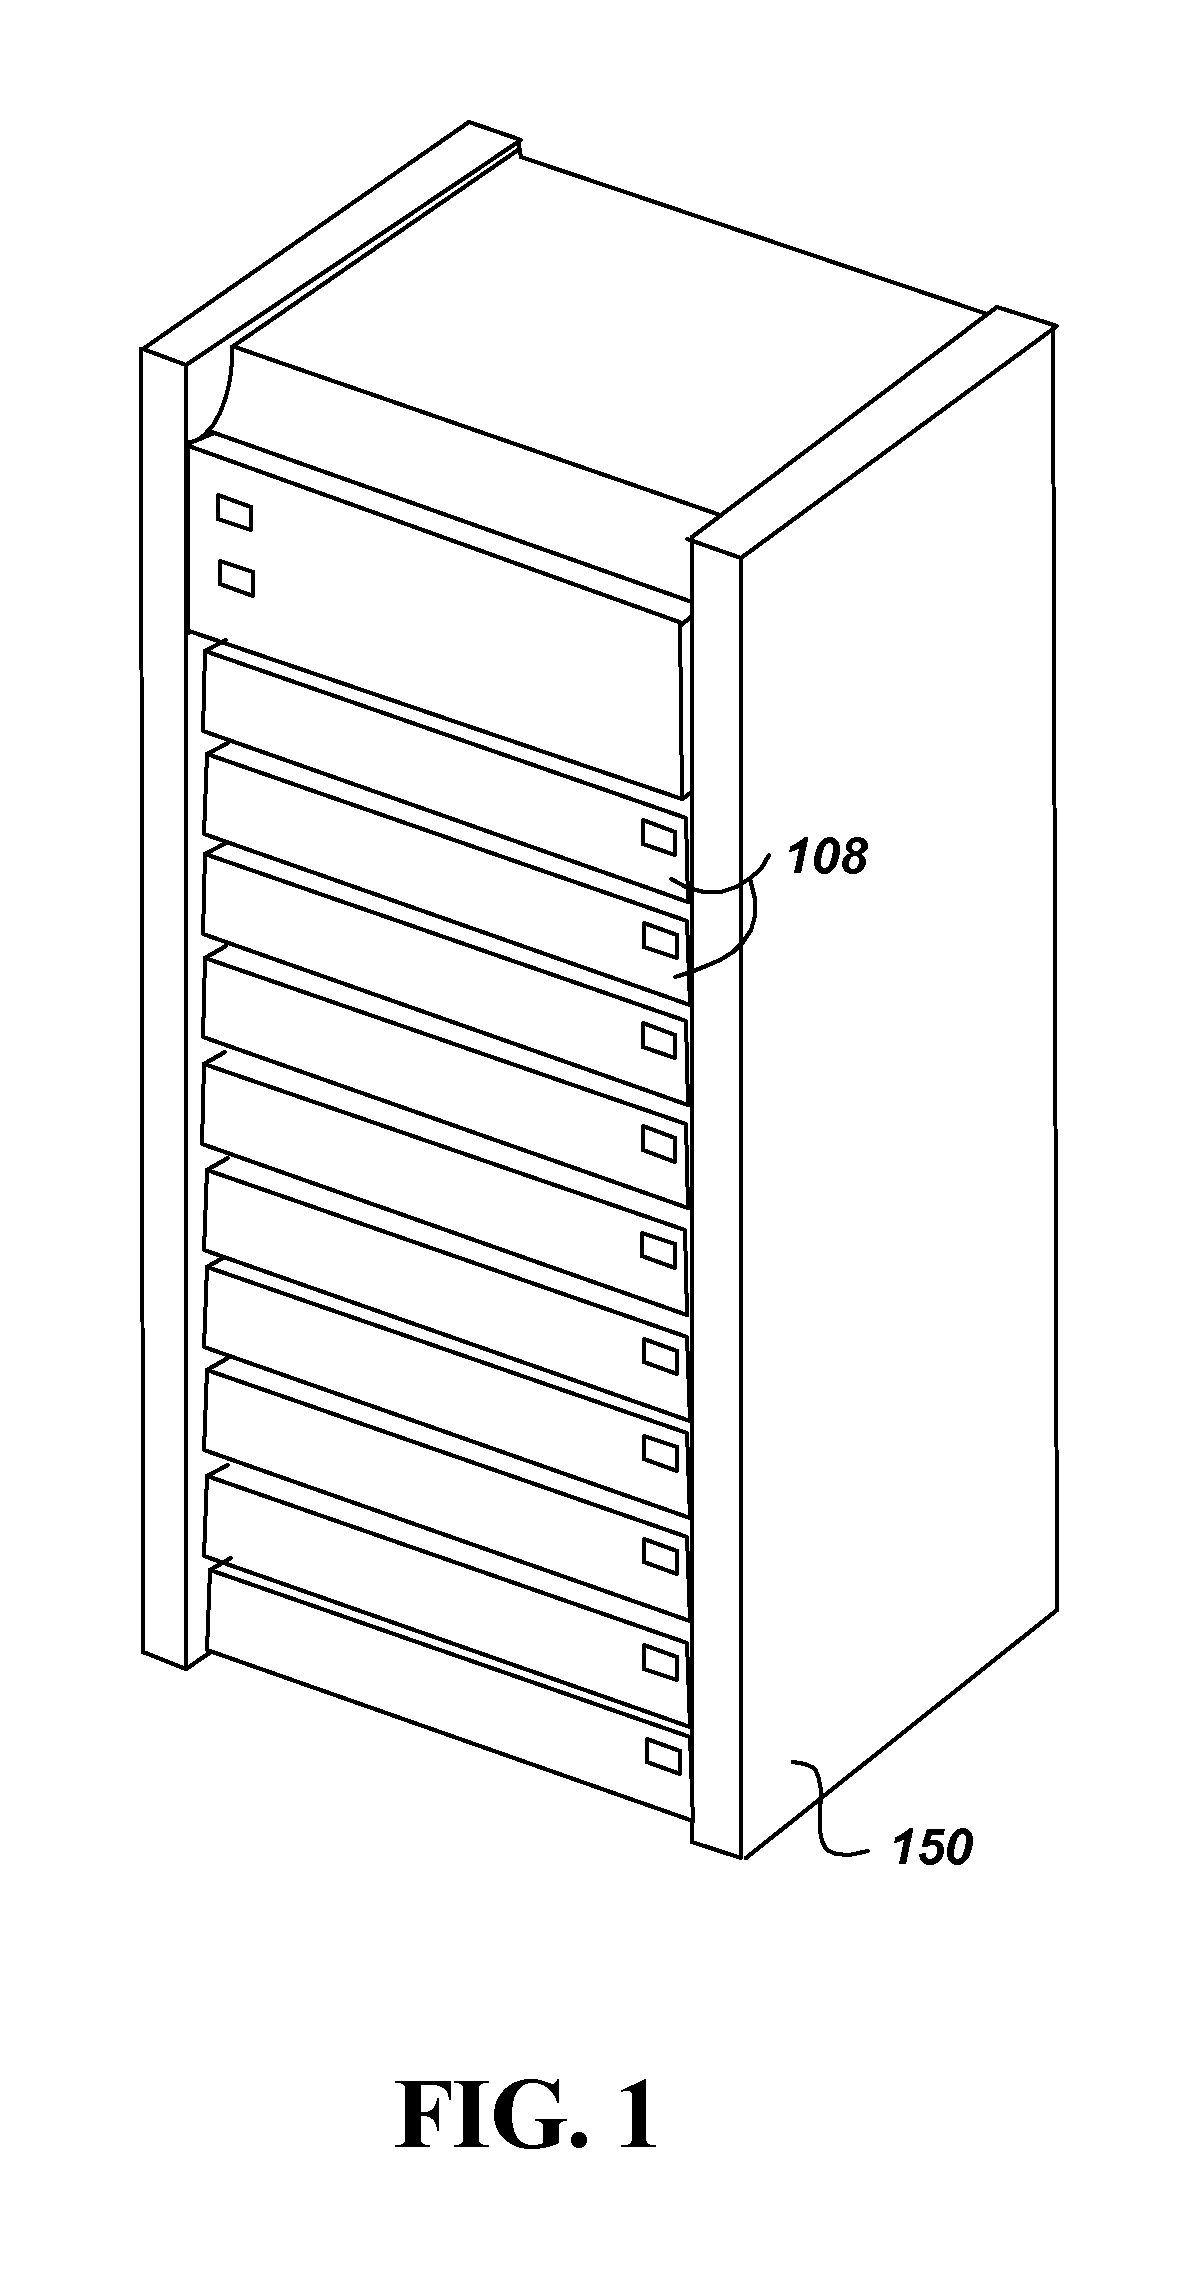 Data center equipment location and monitoring system